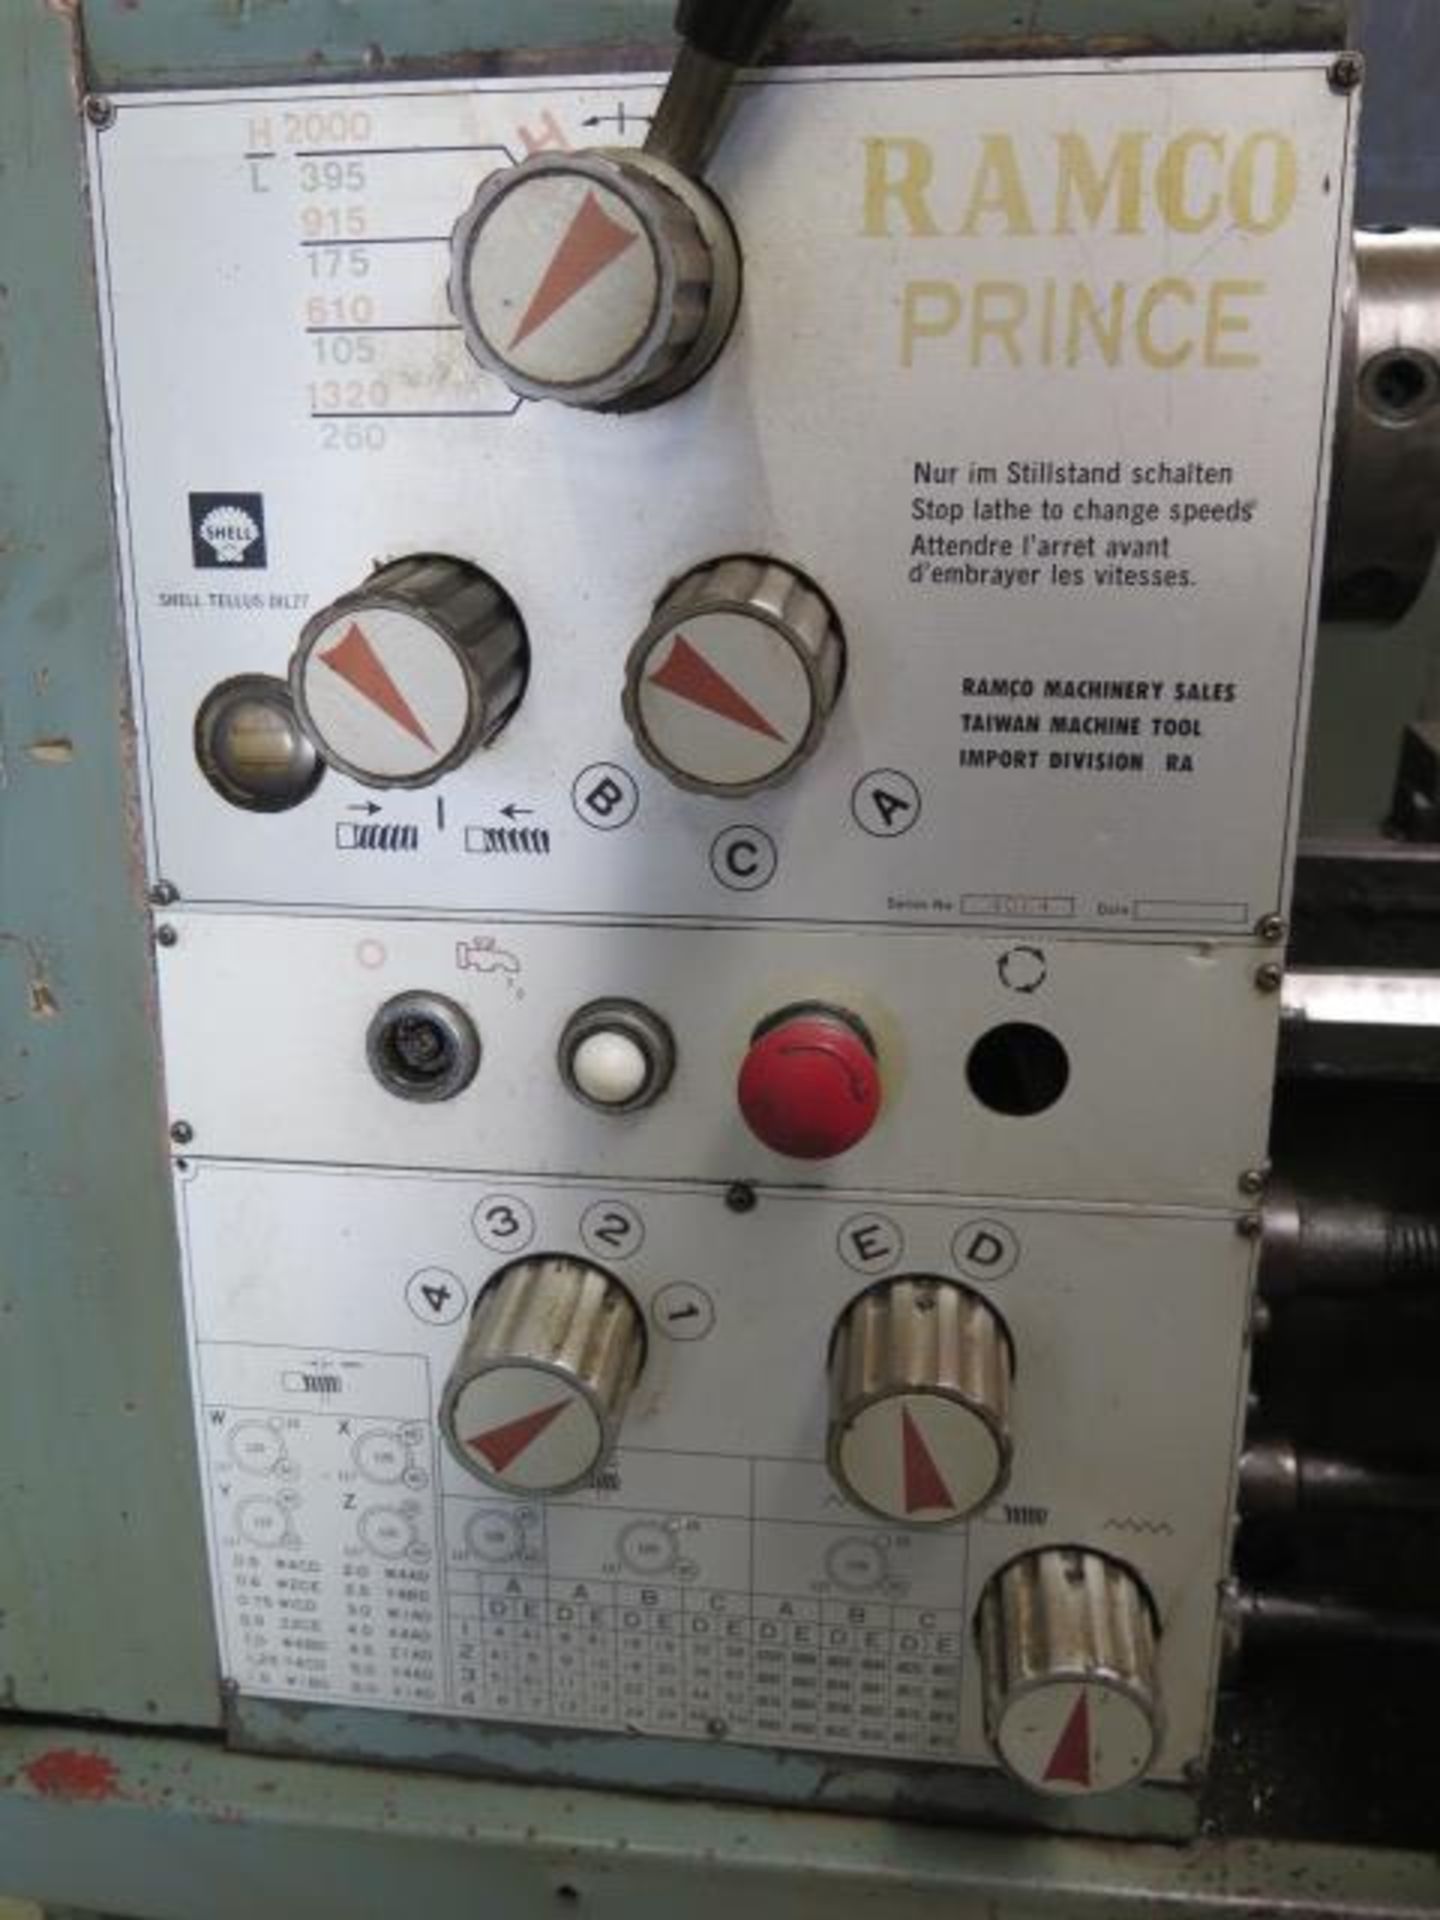 Ramco "Prince" 11" x 30" Geared Head Lathe s/n 4064 w/ 105-2000 RPM, Inch/mm Threading, Tailstock, - Image 5 of 17